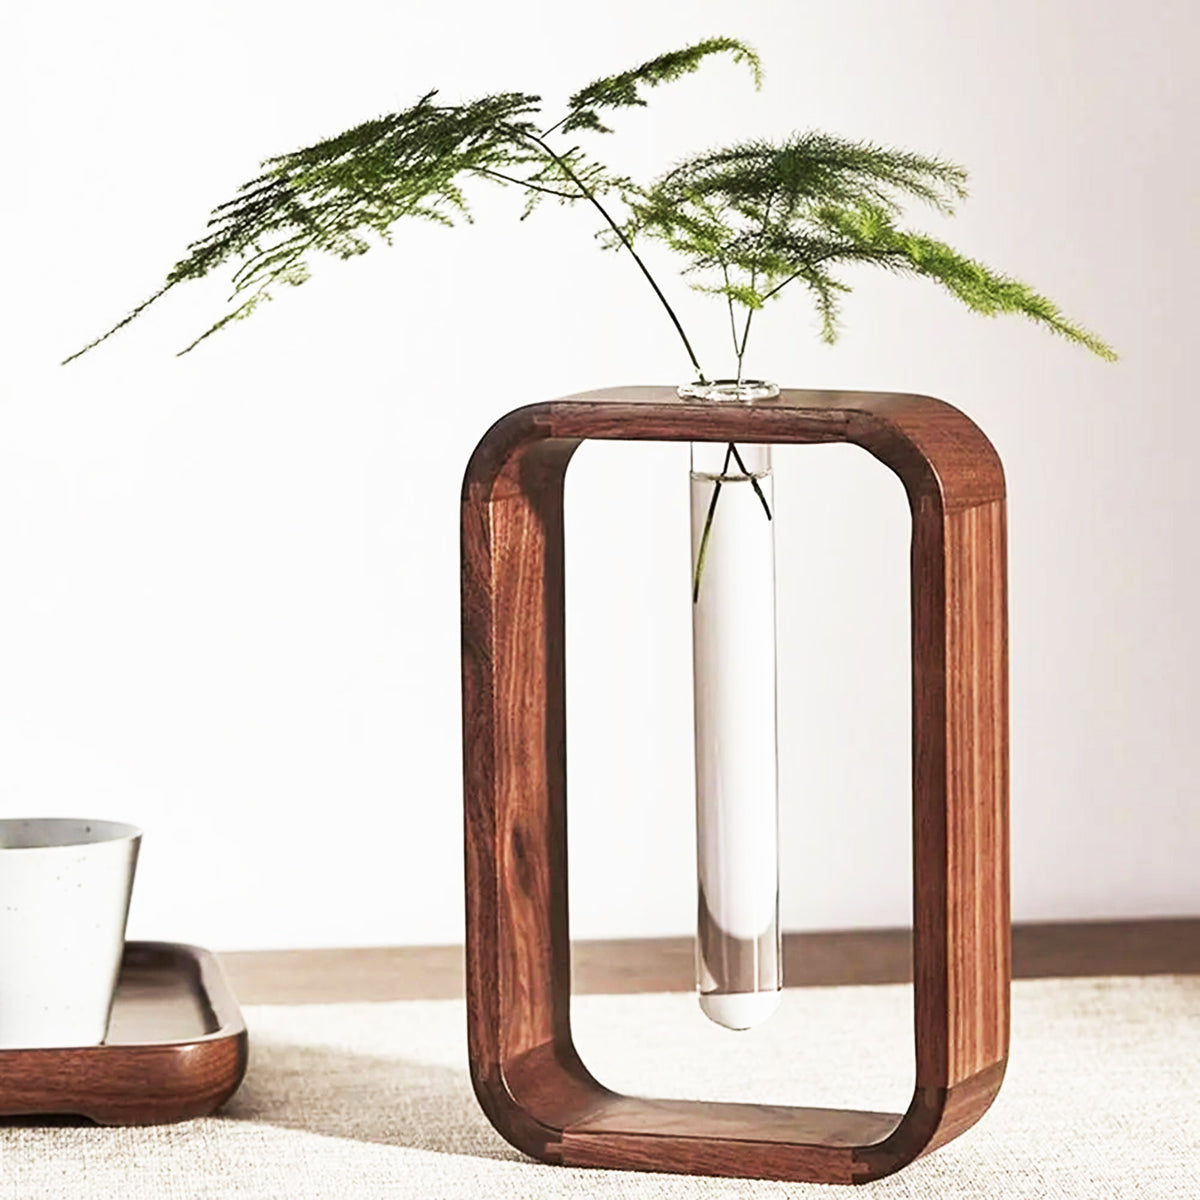 Hydroponics Elegant Nordic-style wooden Vase with Glass Test Tube